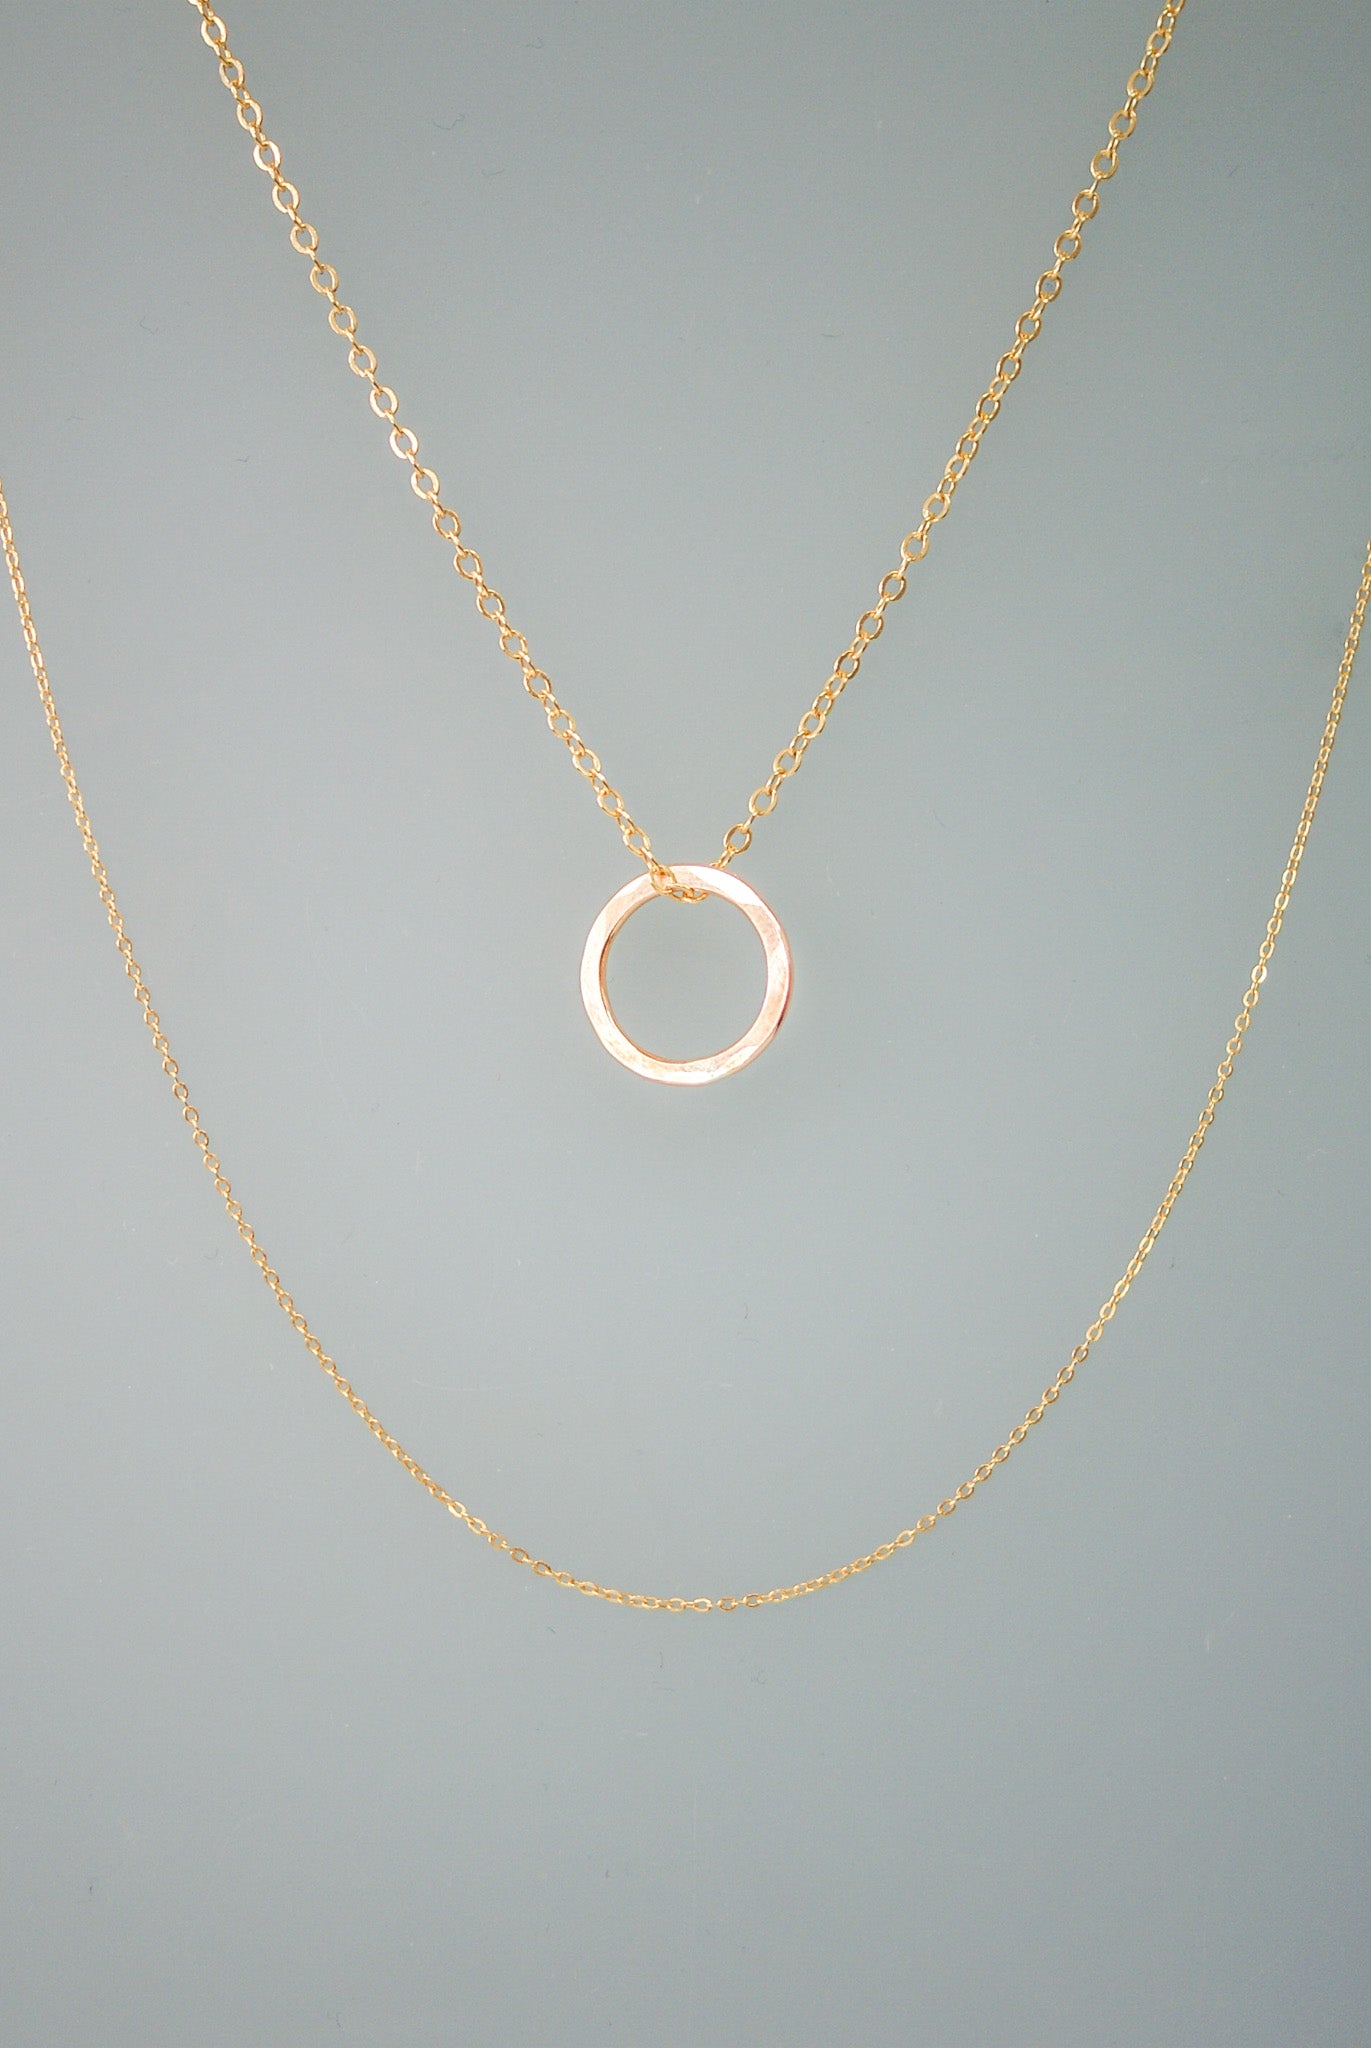 Mini Circle Pendant in Gold Fill, Rose Gold Fill, or Sterling Silver